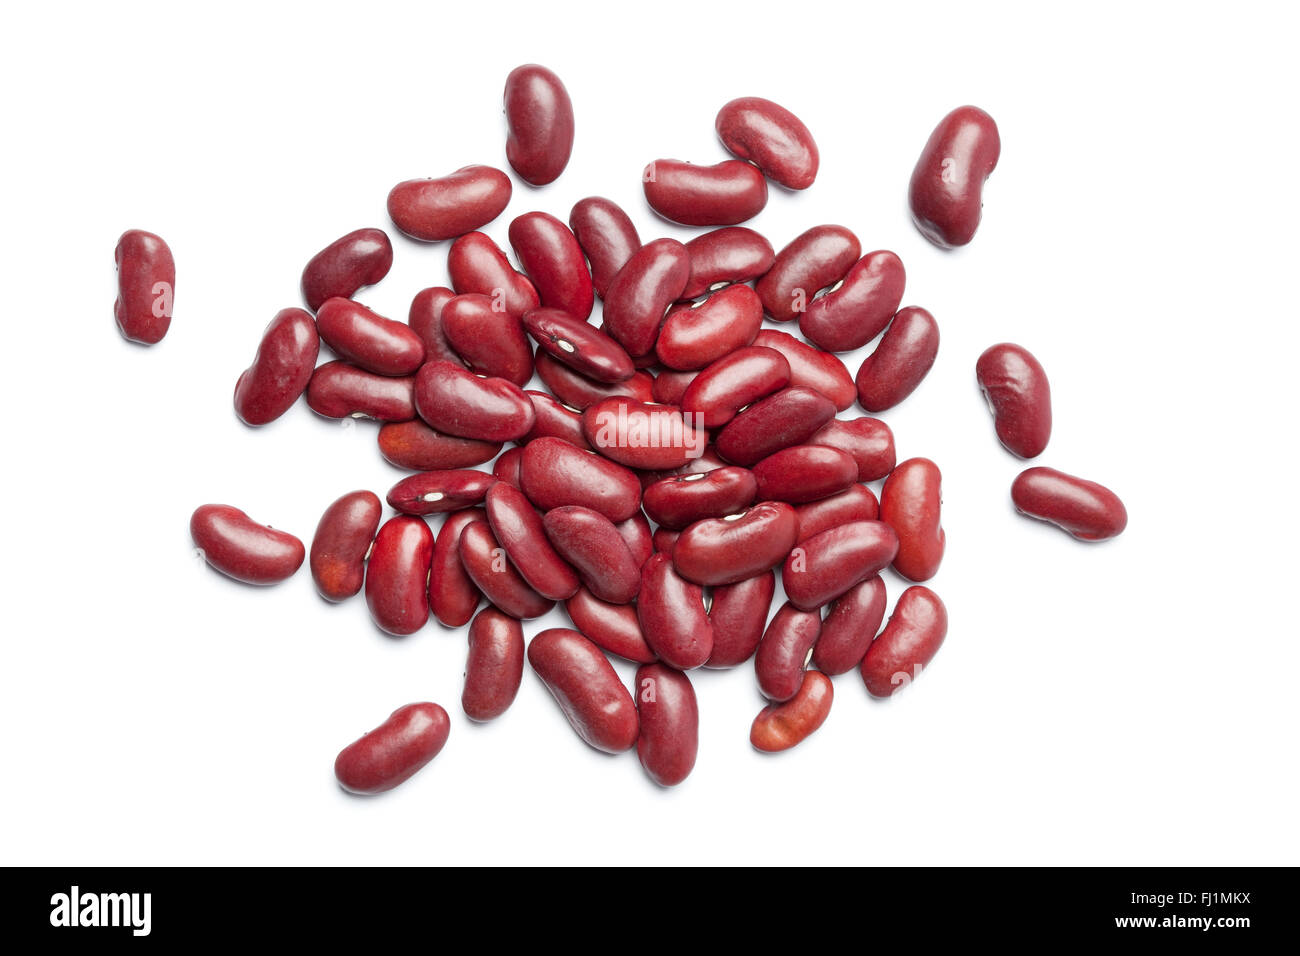 Raw red kidney beans on white background Stock Photo